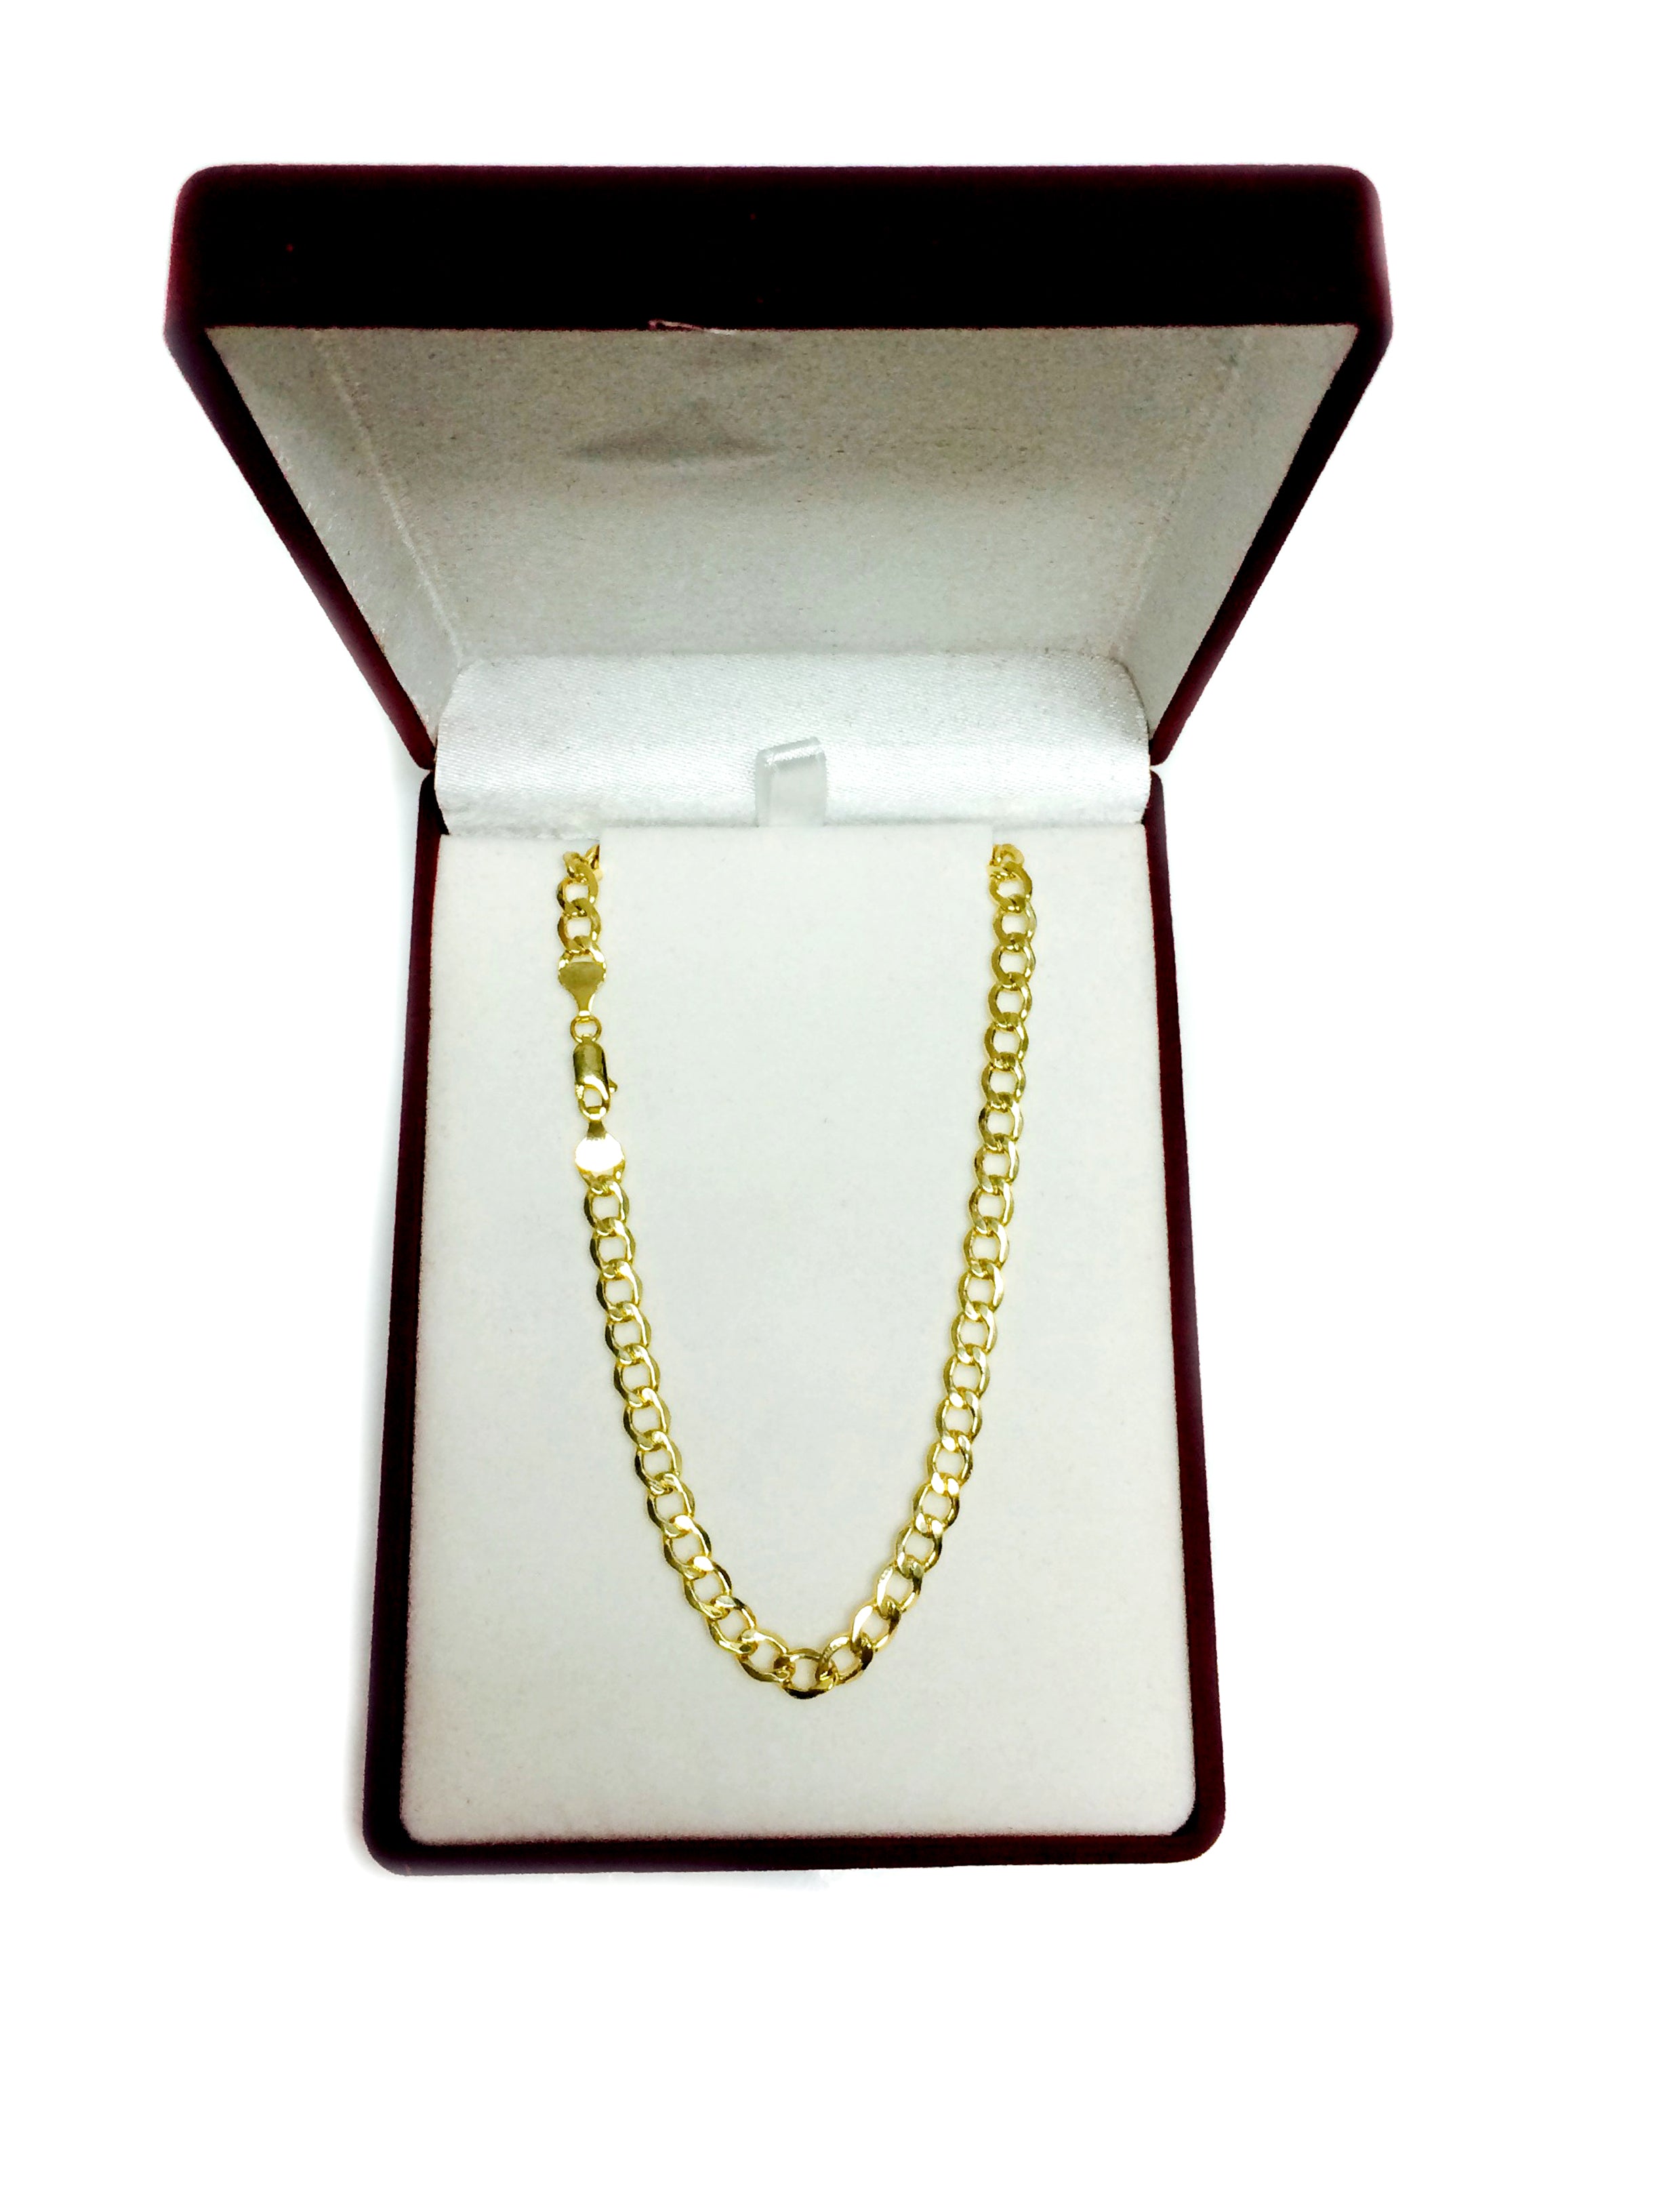 14k Yellow Gold Curb Hollow Chain Necklace, Width 5.5mm